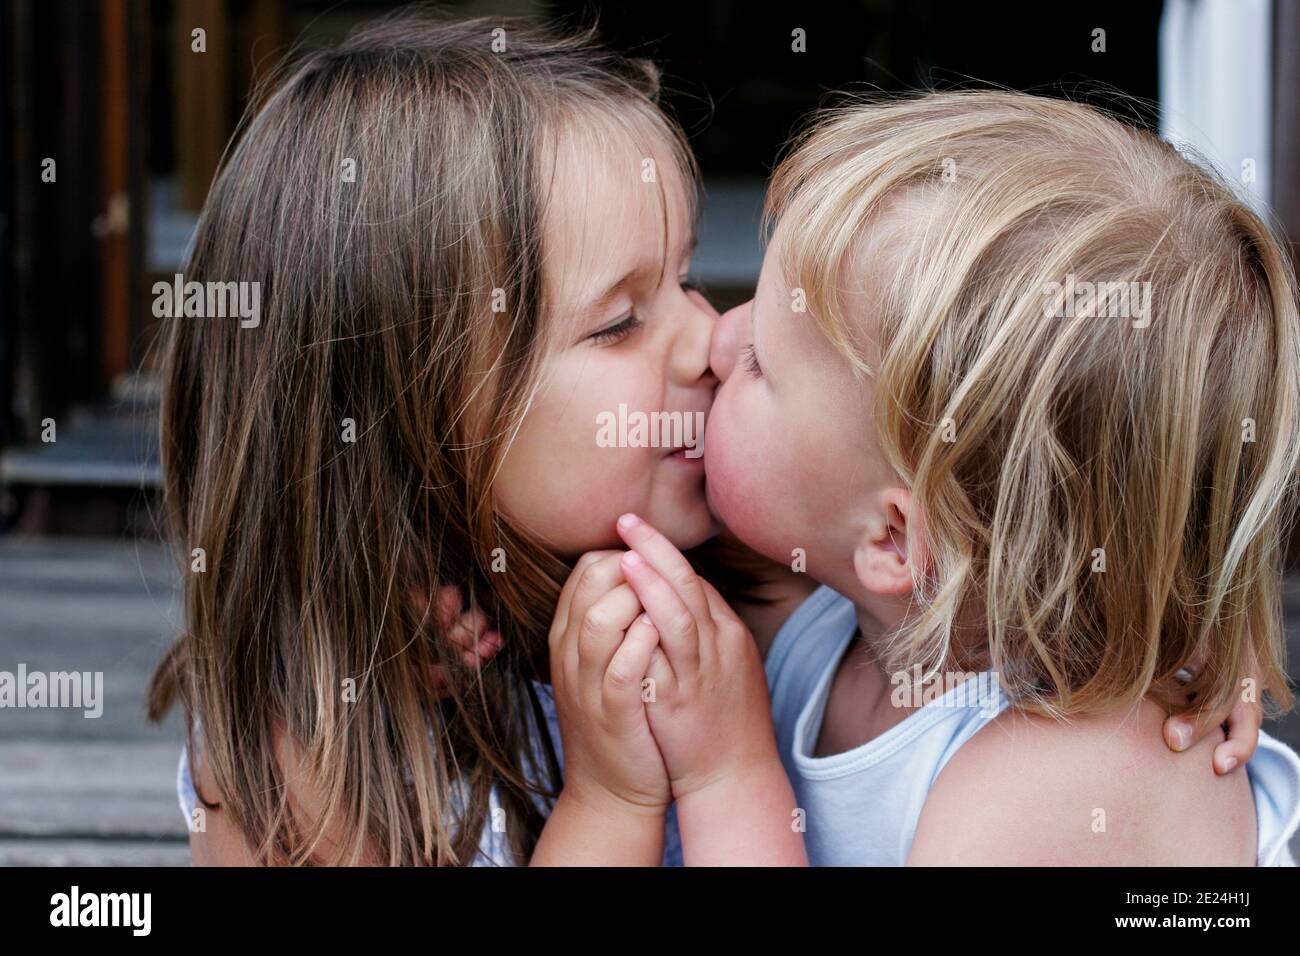 Sisters giving each other kiss Stock Photo